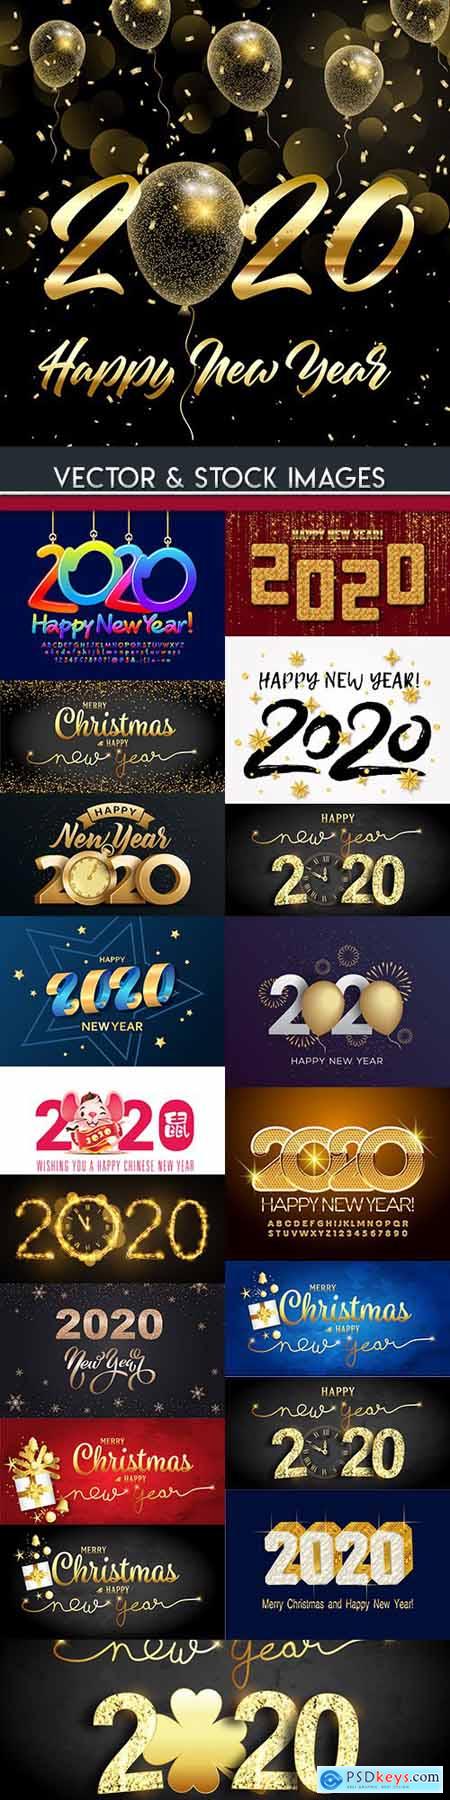 New Year and Christmas decorative 2020 illustration 6